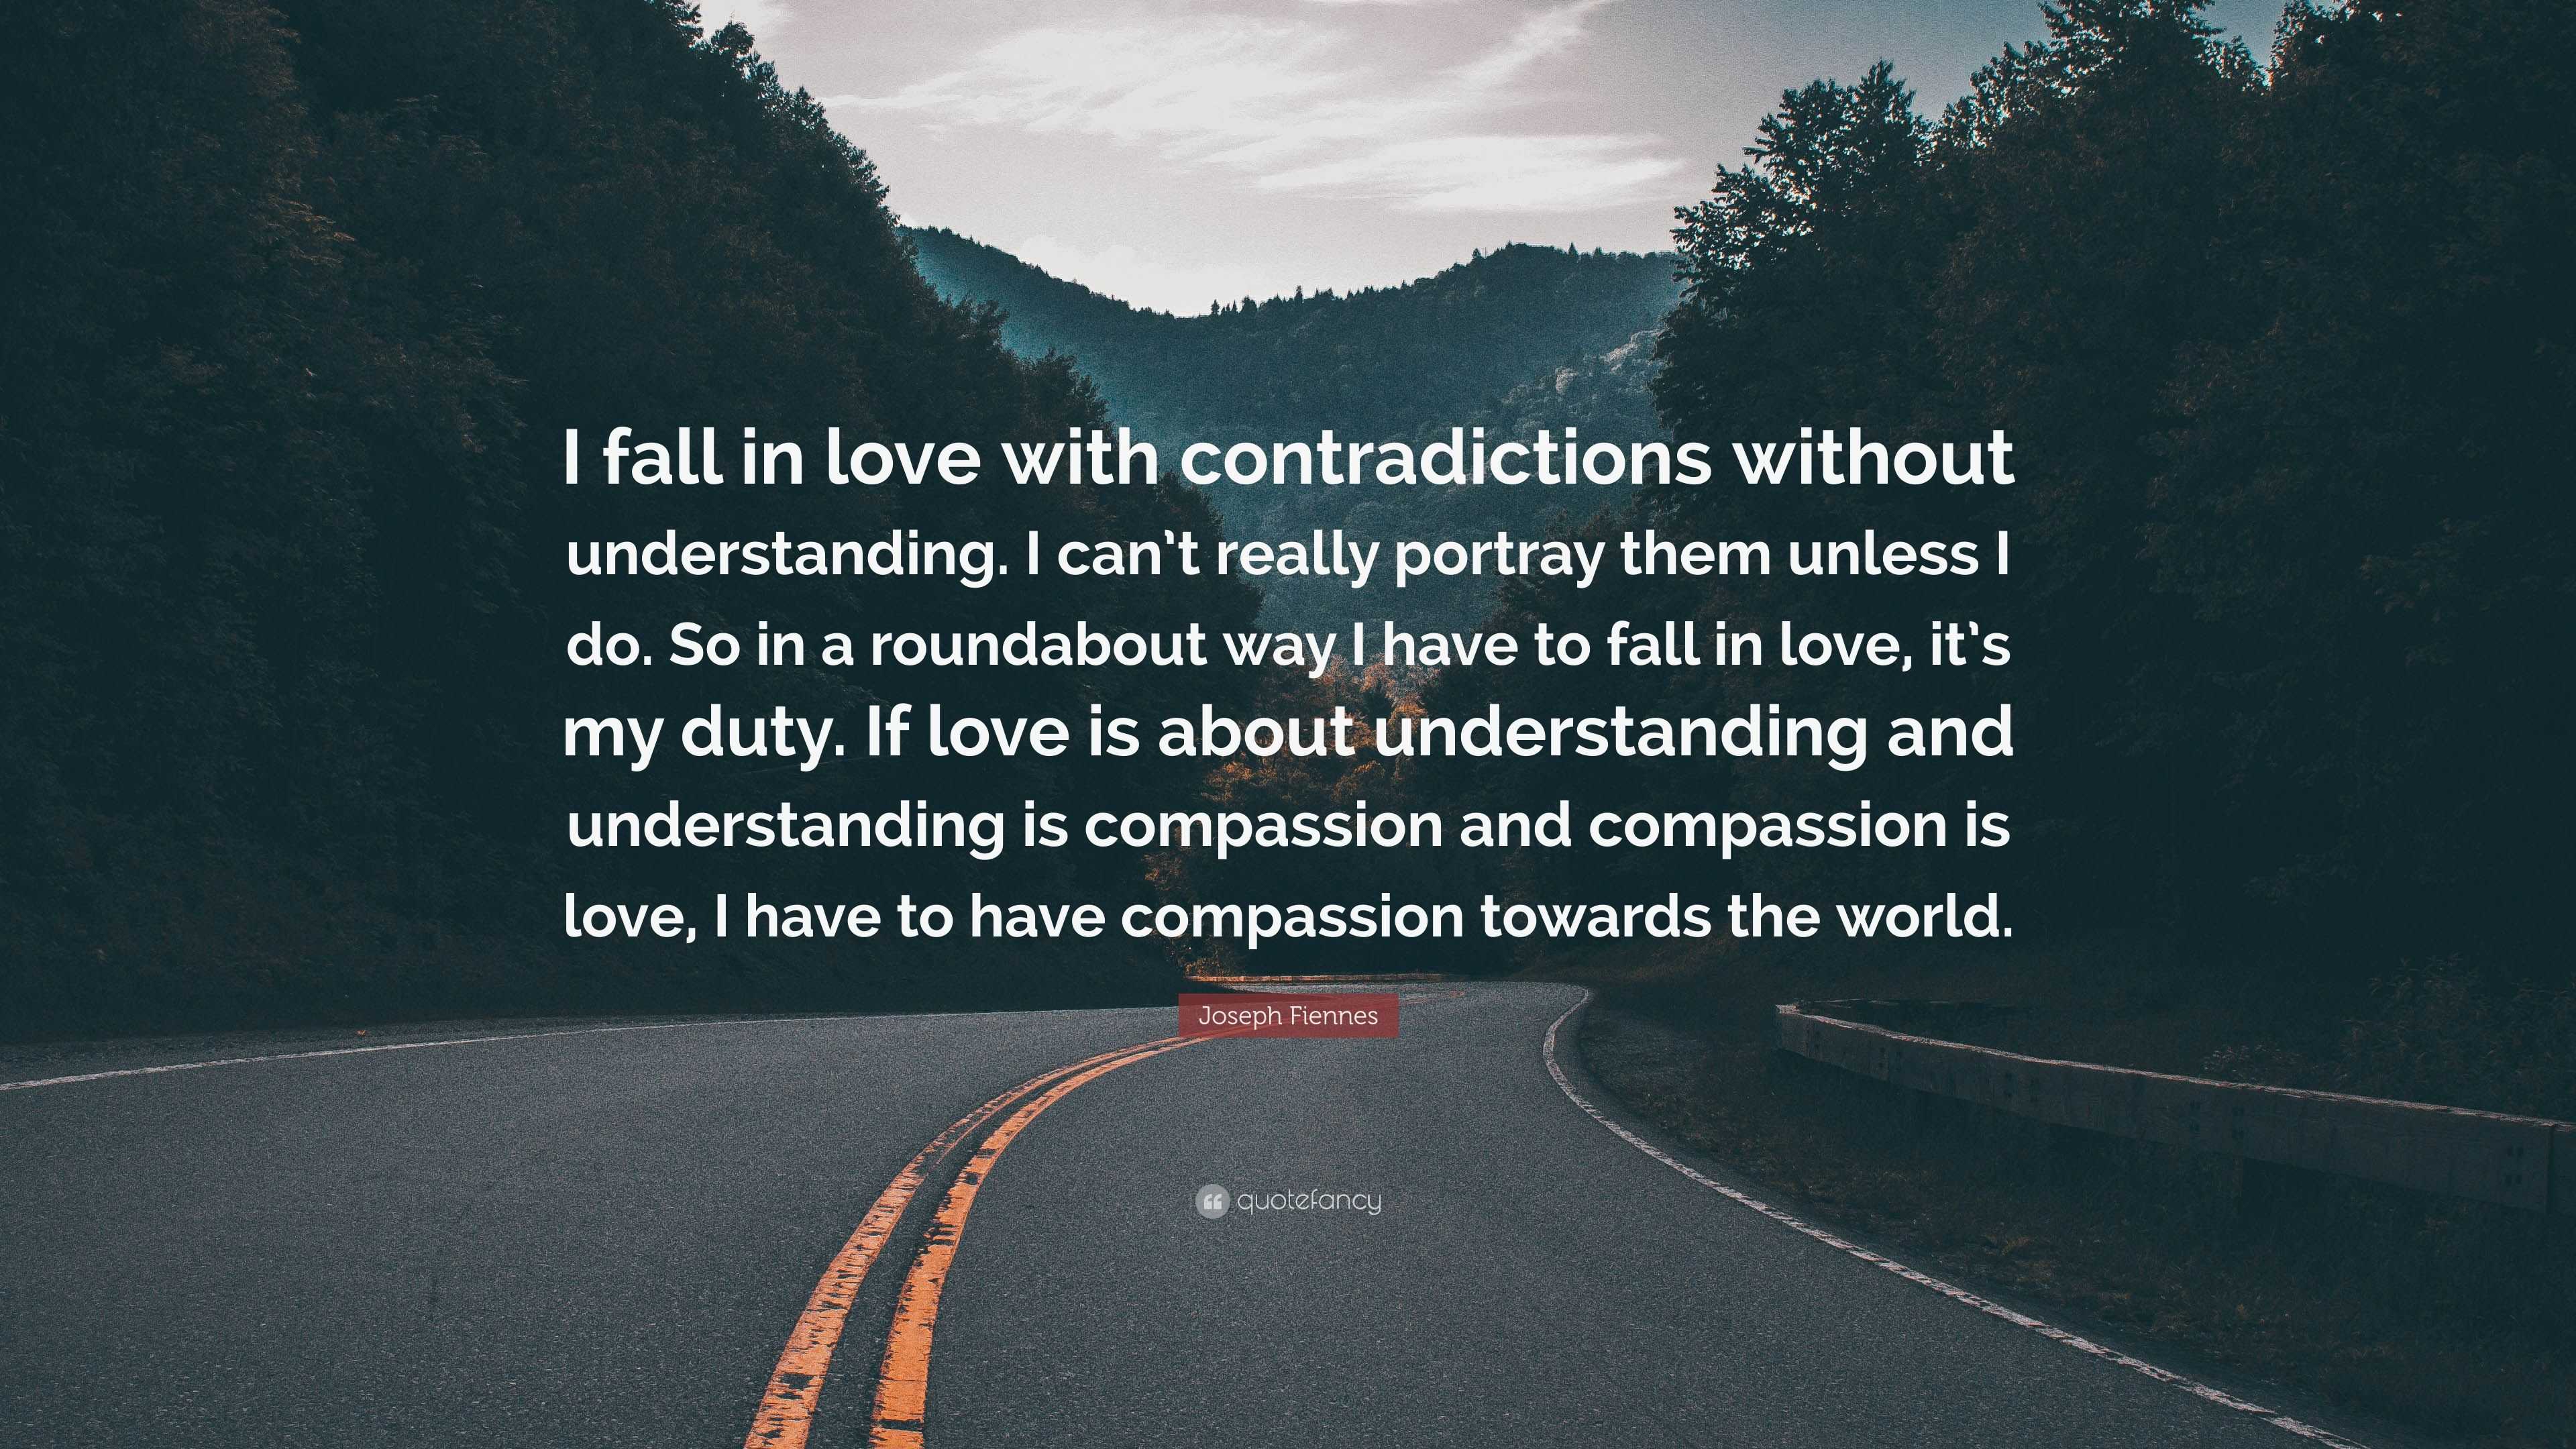 Joseph Fiennes Quote: “I fall in love with contradictions without ...